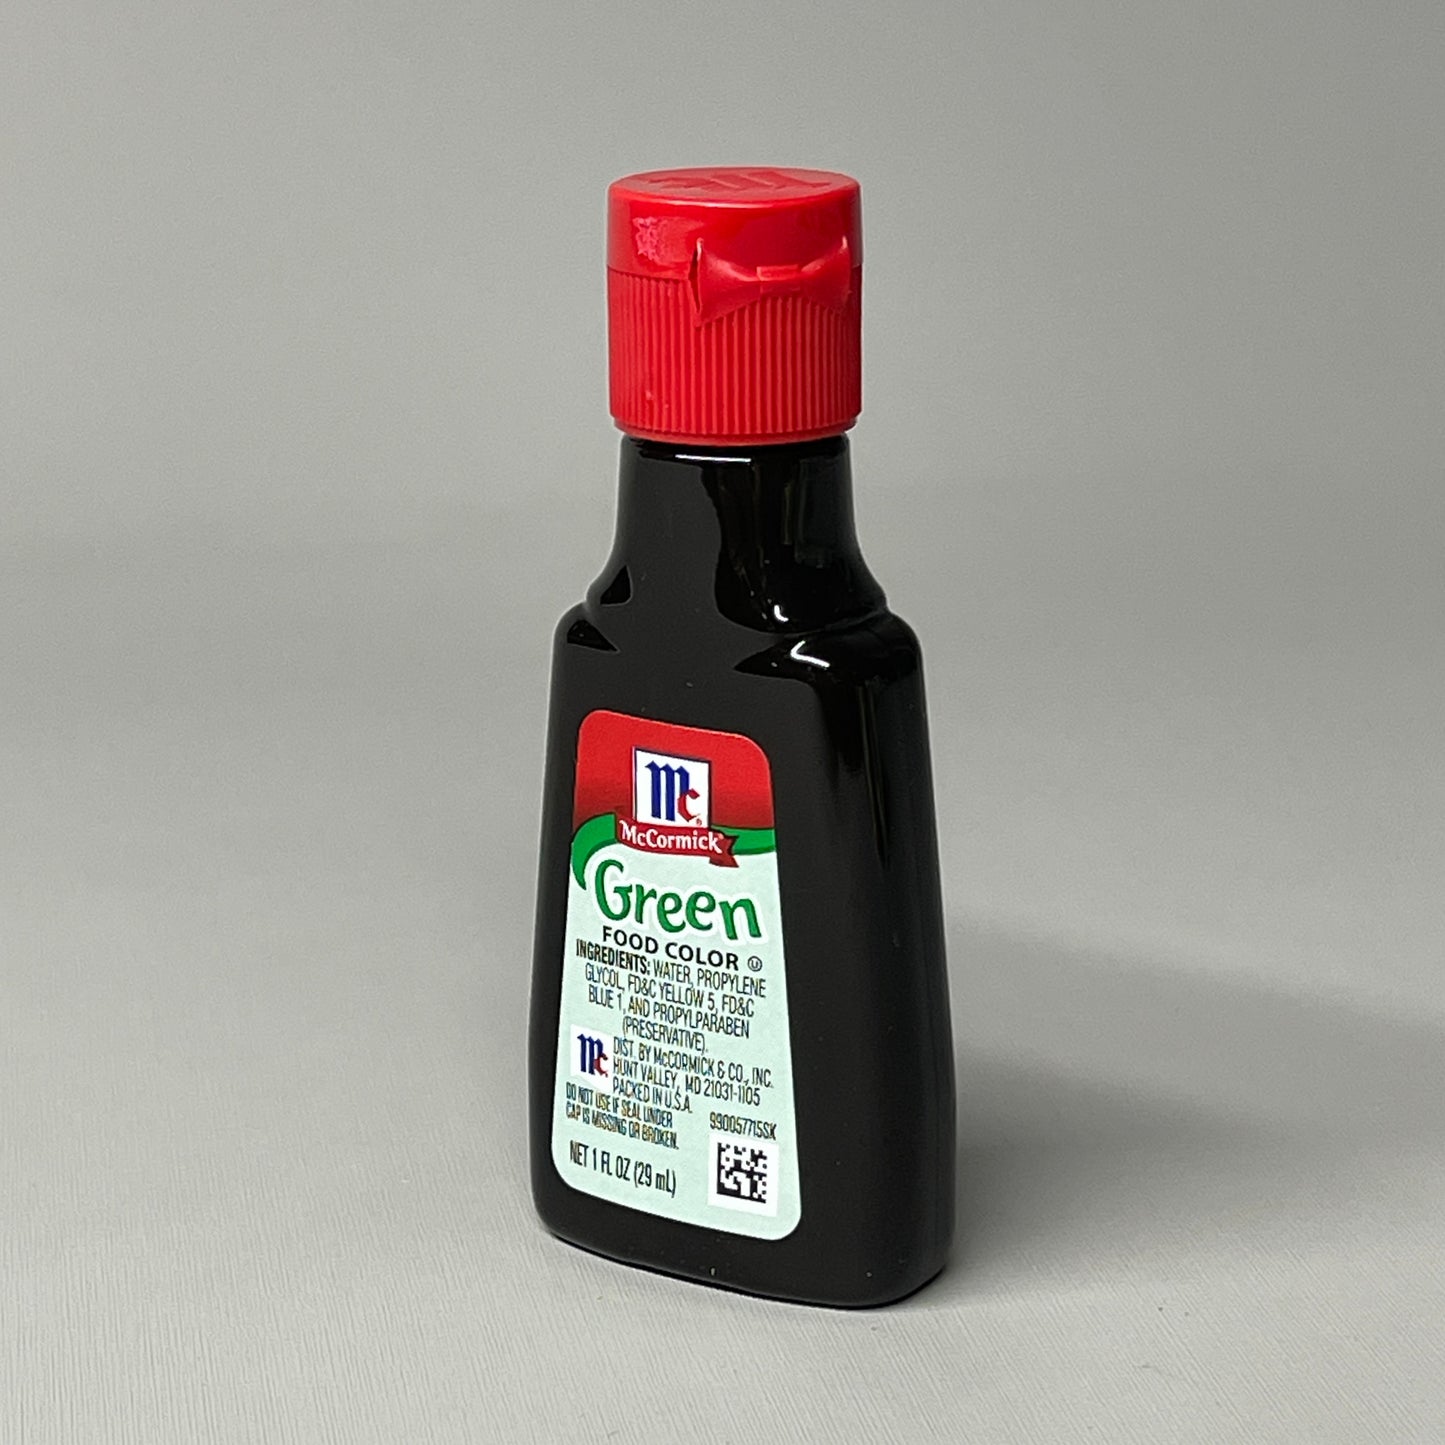 MCCORMICK Green Food Color (Food Coloring) 1.0 fl oz (29 ml) Best By 4/25 (New)